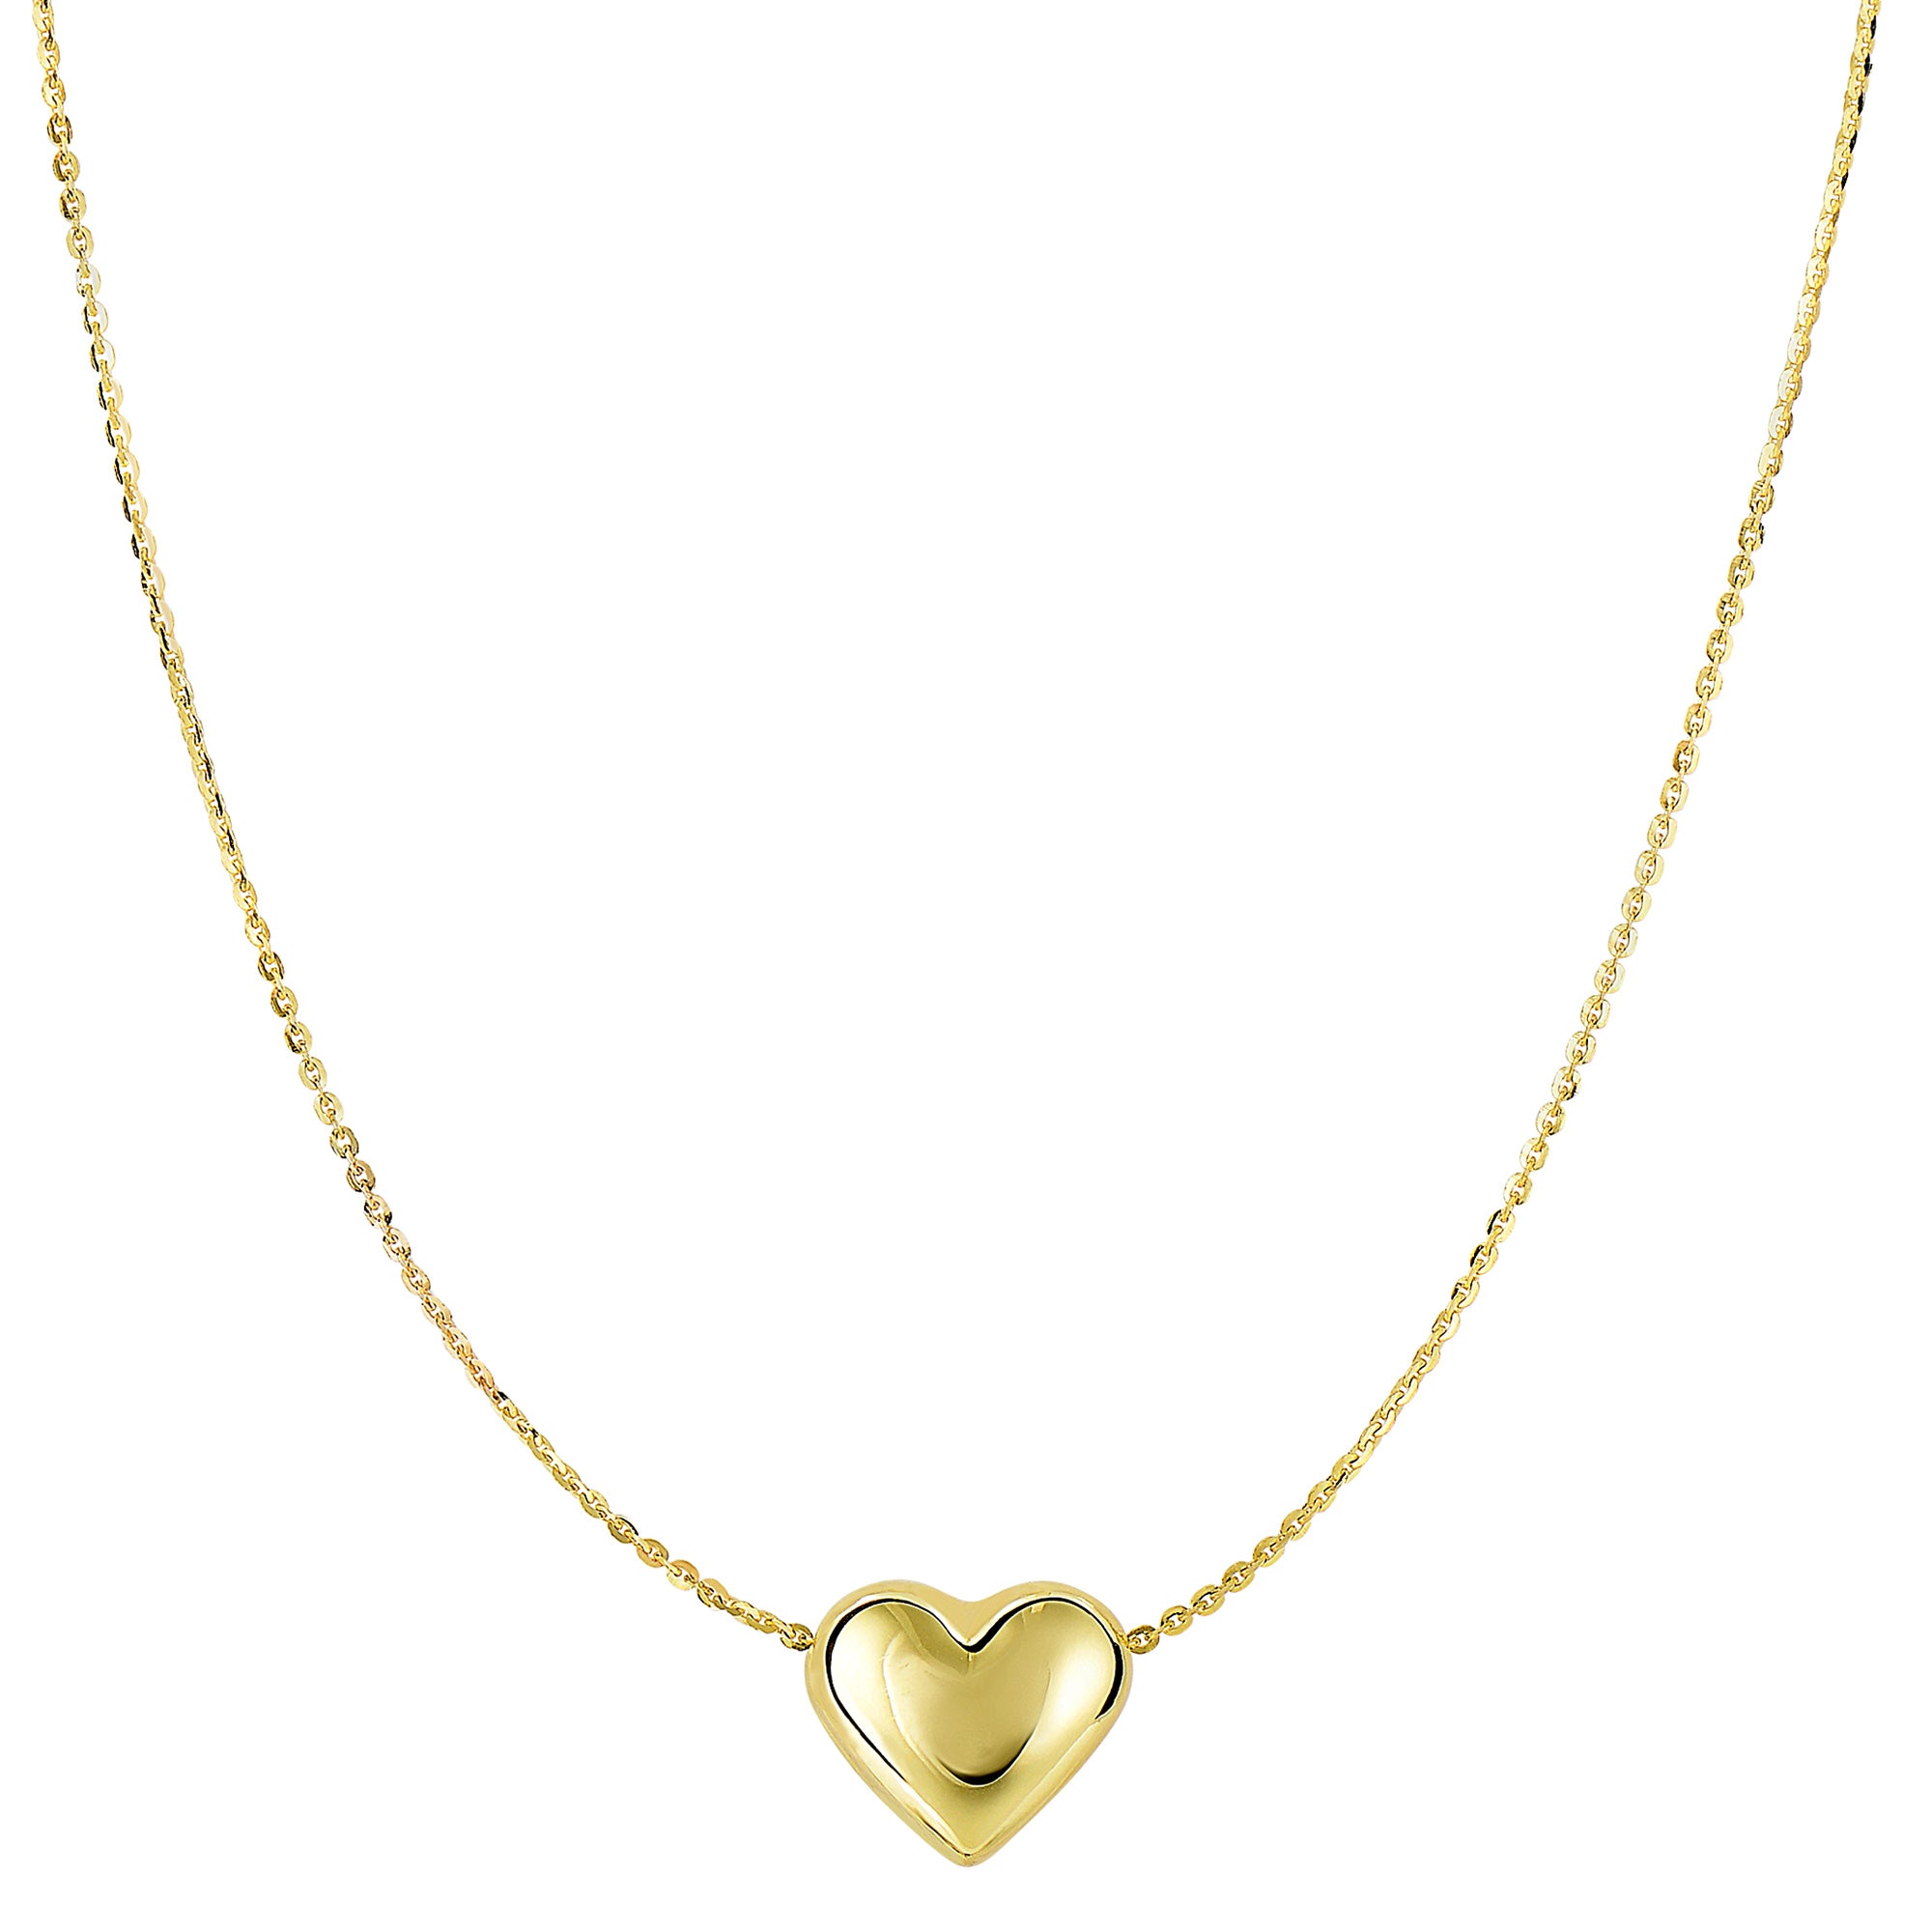 14k Yellow Gold Sliding Puffed Heart Pendant Necklace, 18"